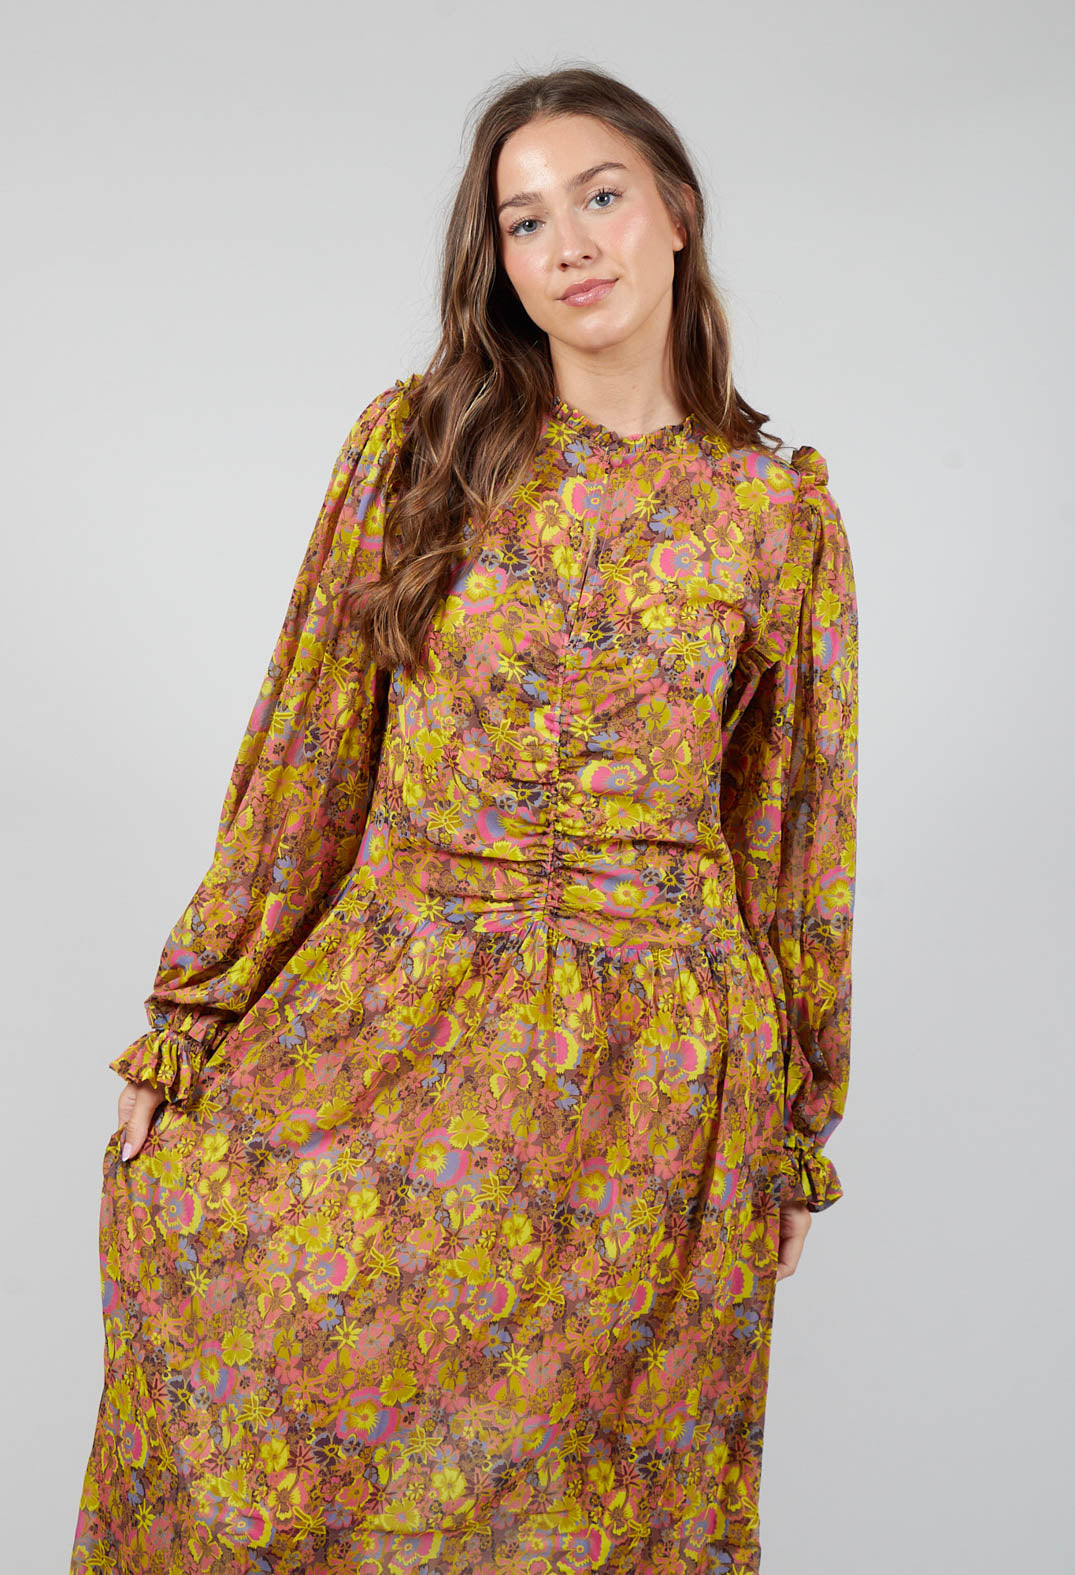 Milly Dress in Freesia Canary